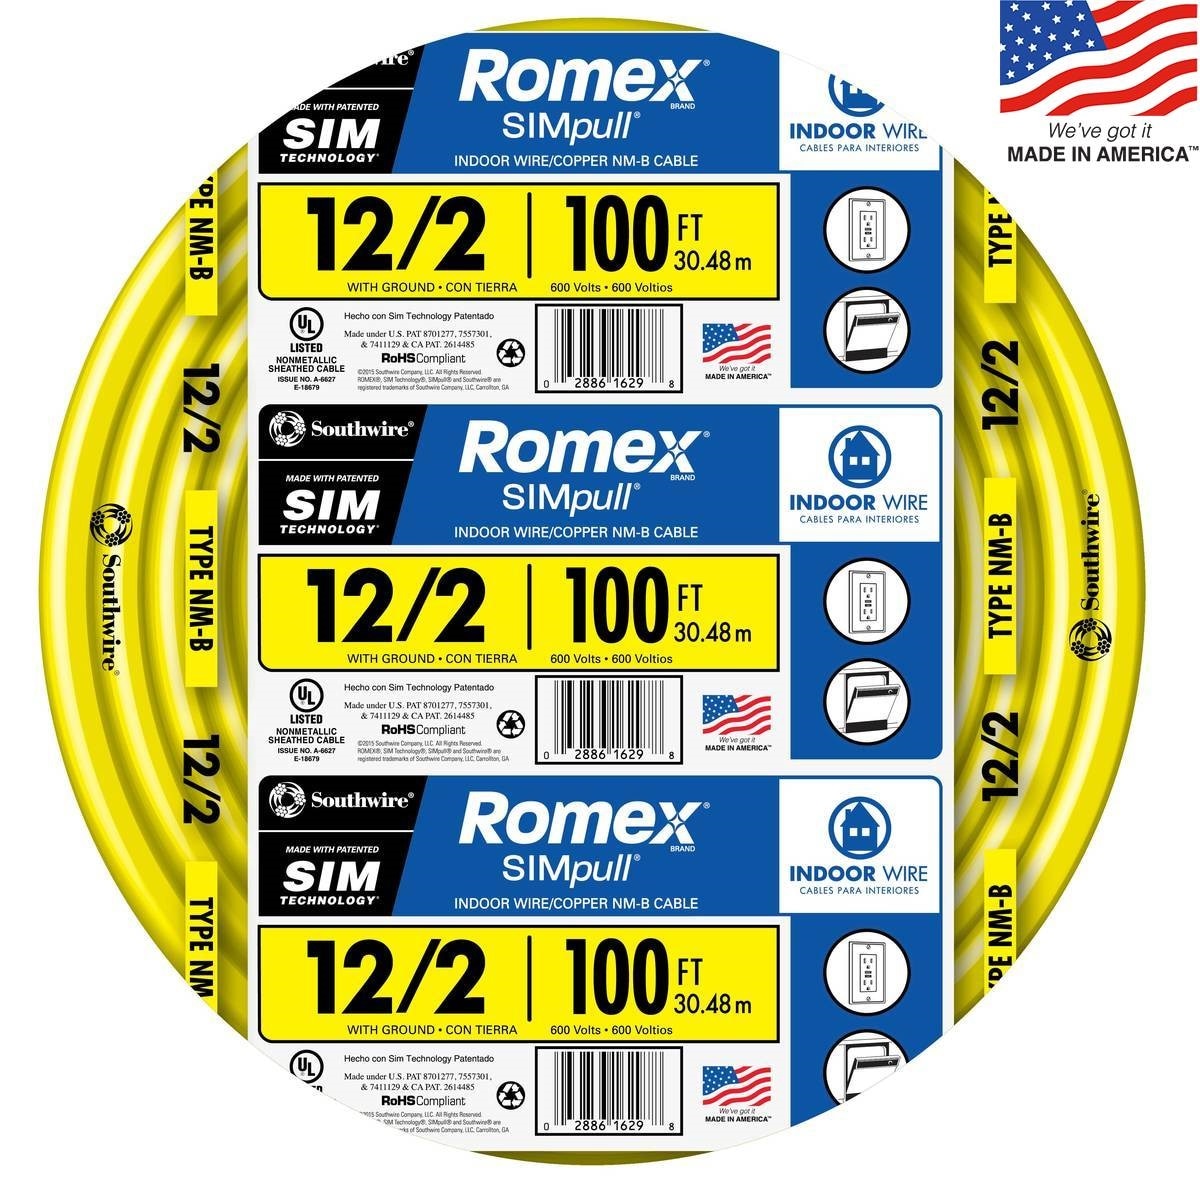 12/2/2 W/GR 30' FT ROMEX INDOOR ELECTRICAL WIRE ALL LENGTHS AVAILABLE 